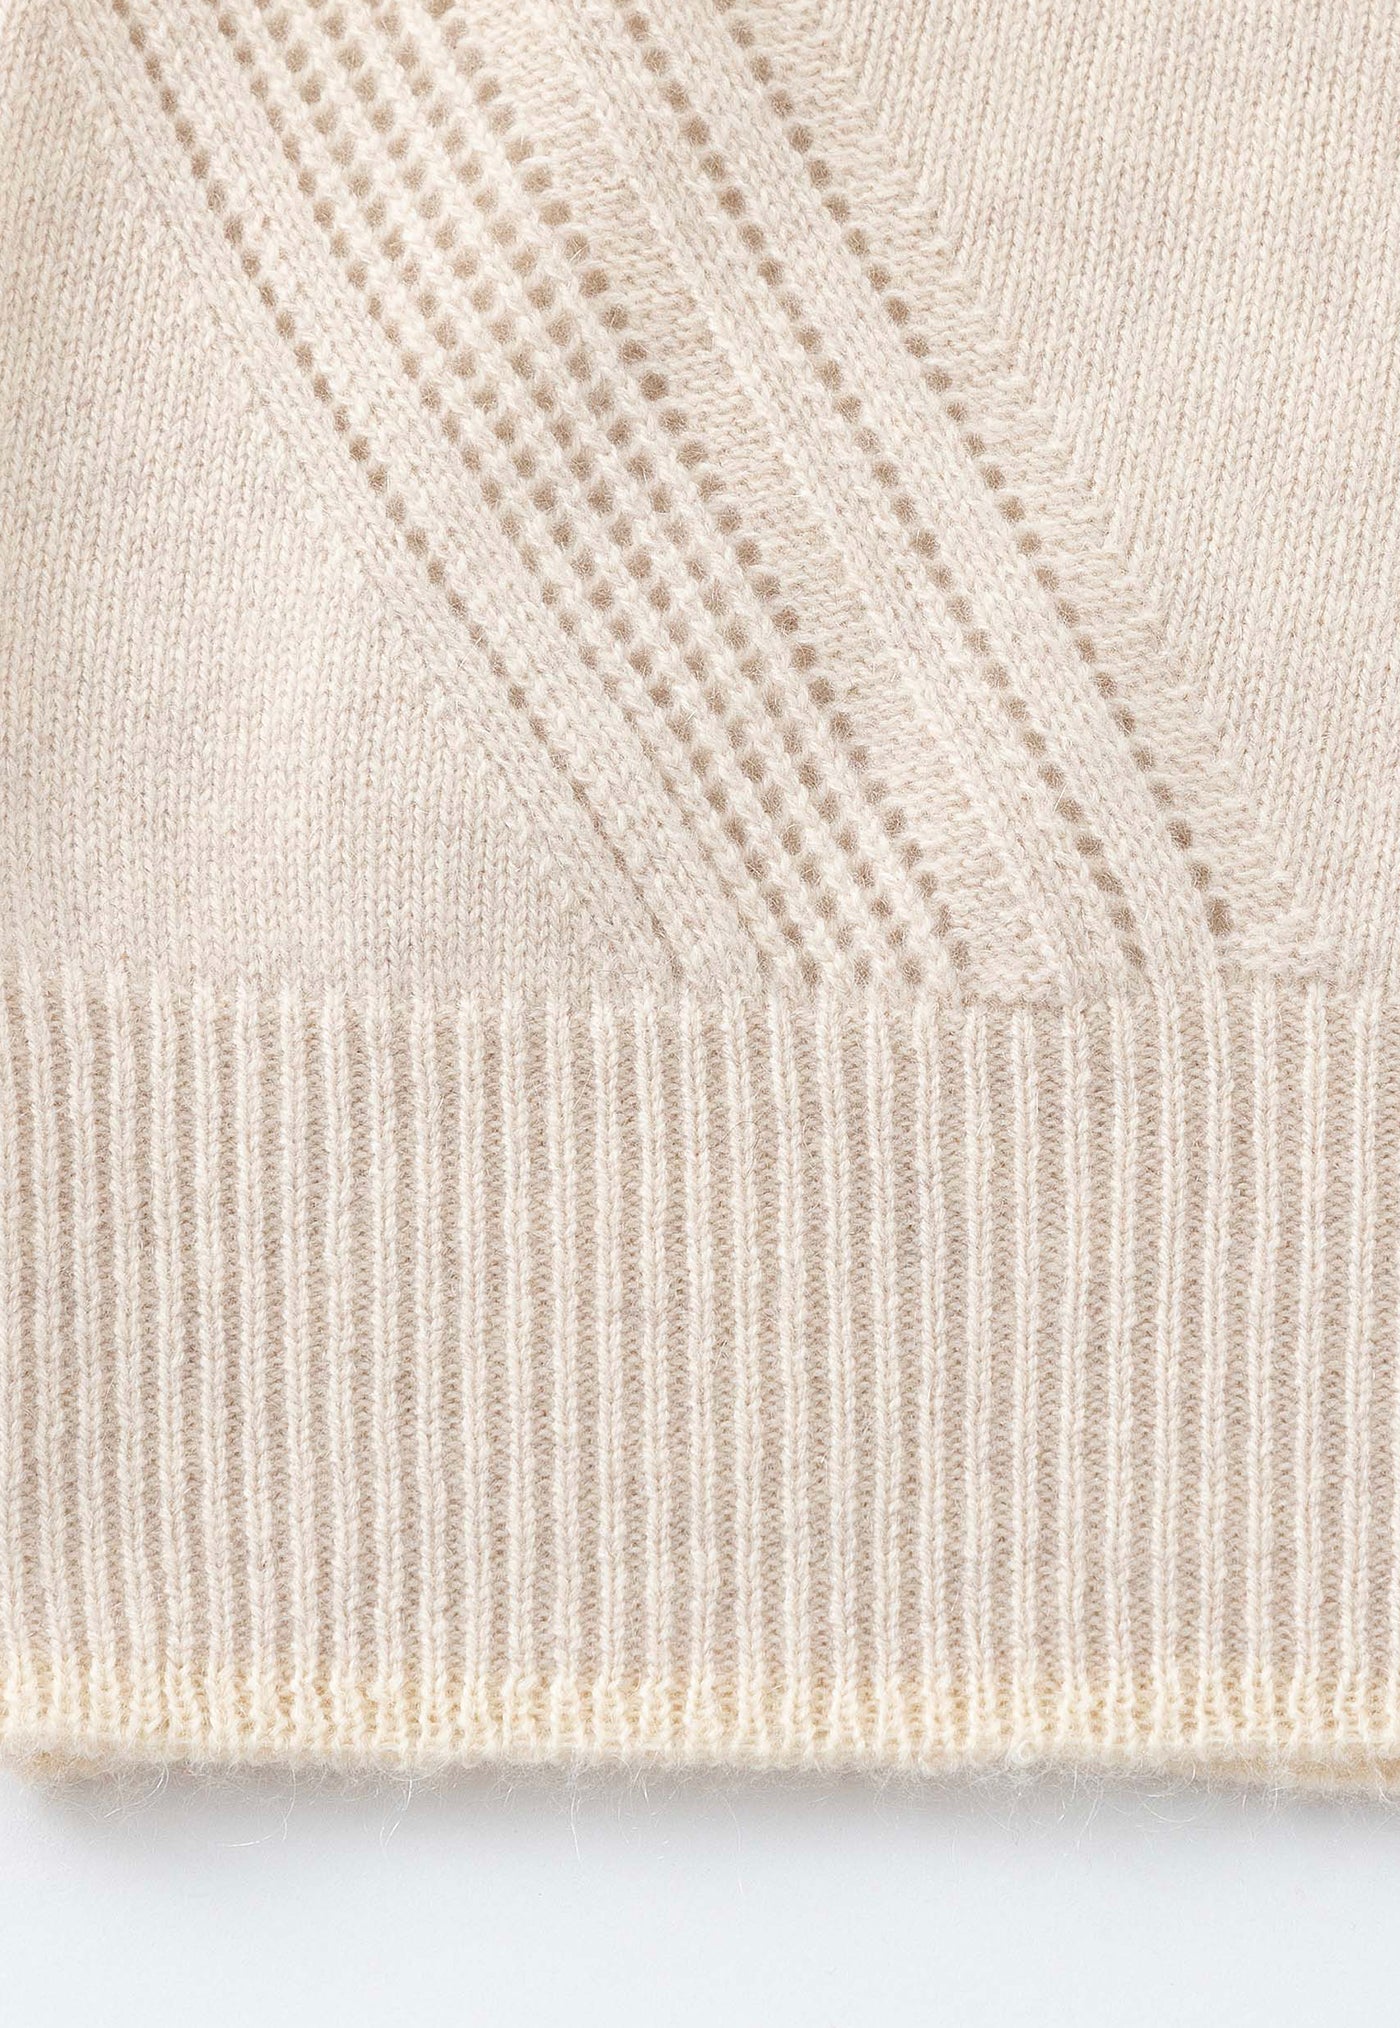 N.08 Cashmere Contrast Funnel Neck Sweater - Shell sold by Angel Divine